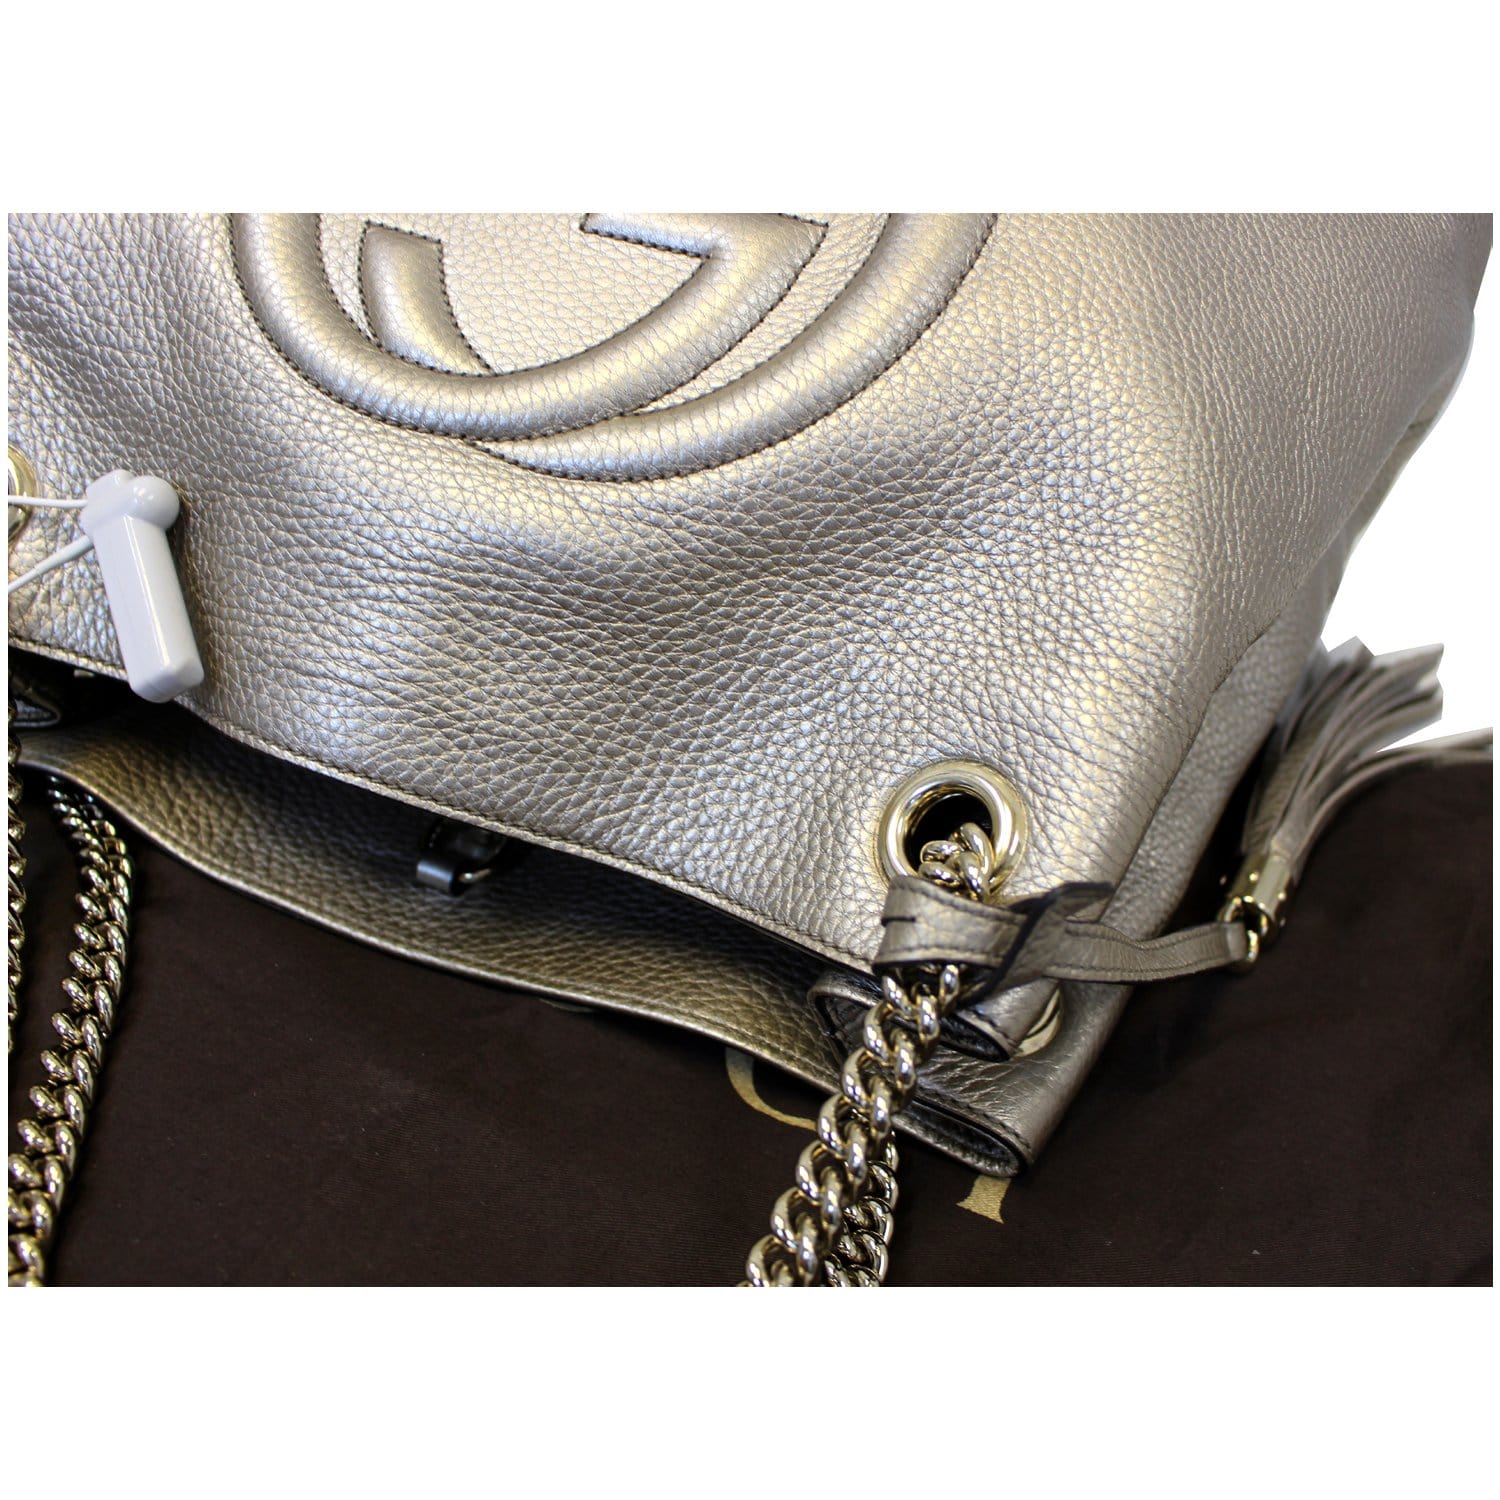 GUCCI Soho Pebbled Leather Chain Shoulder Bag 308982 Silver